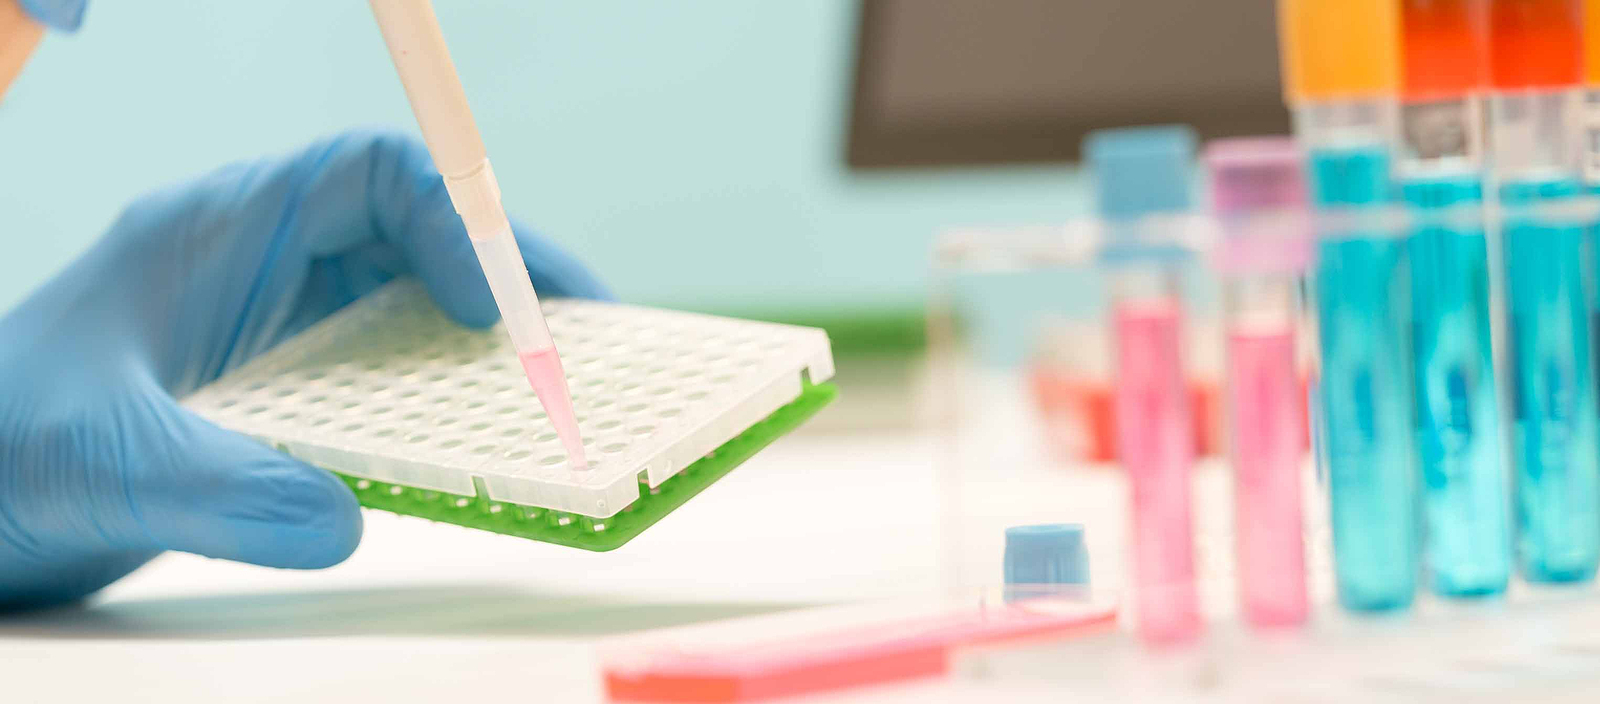 stock photograph of a lab tech handling pipettes in a genetic lab